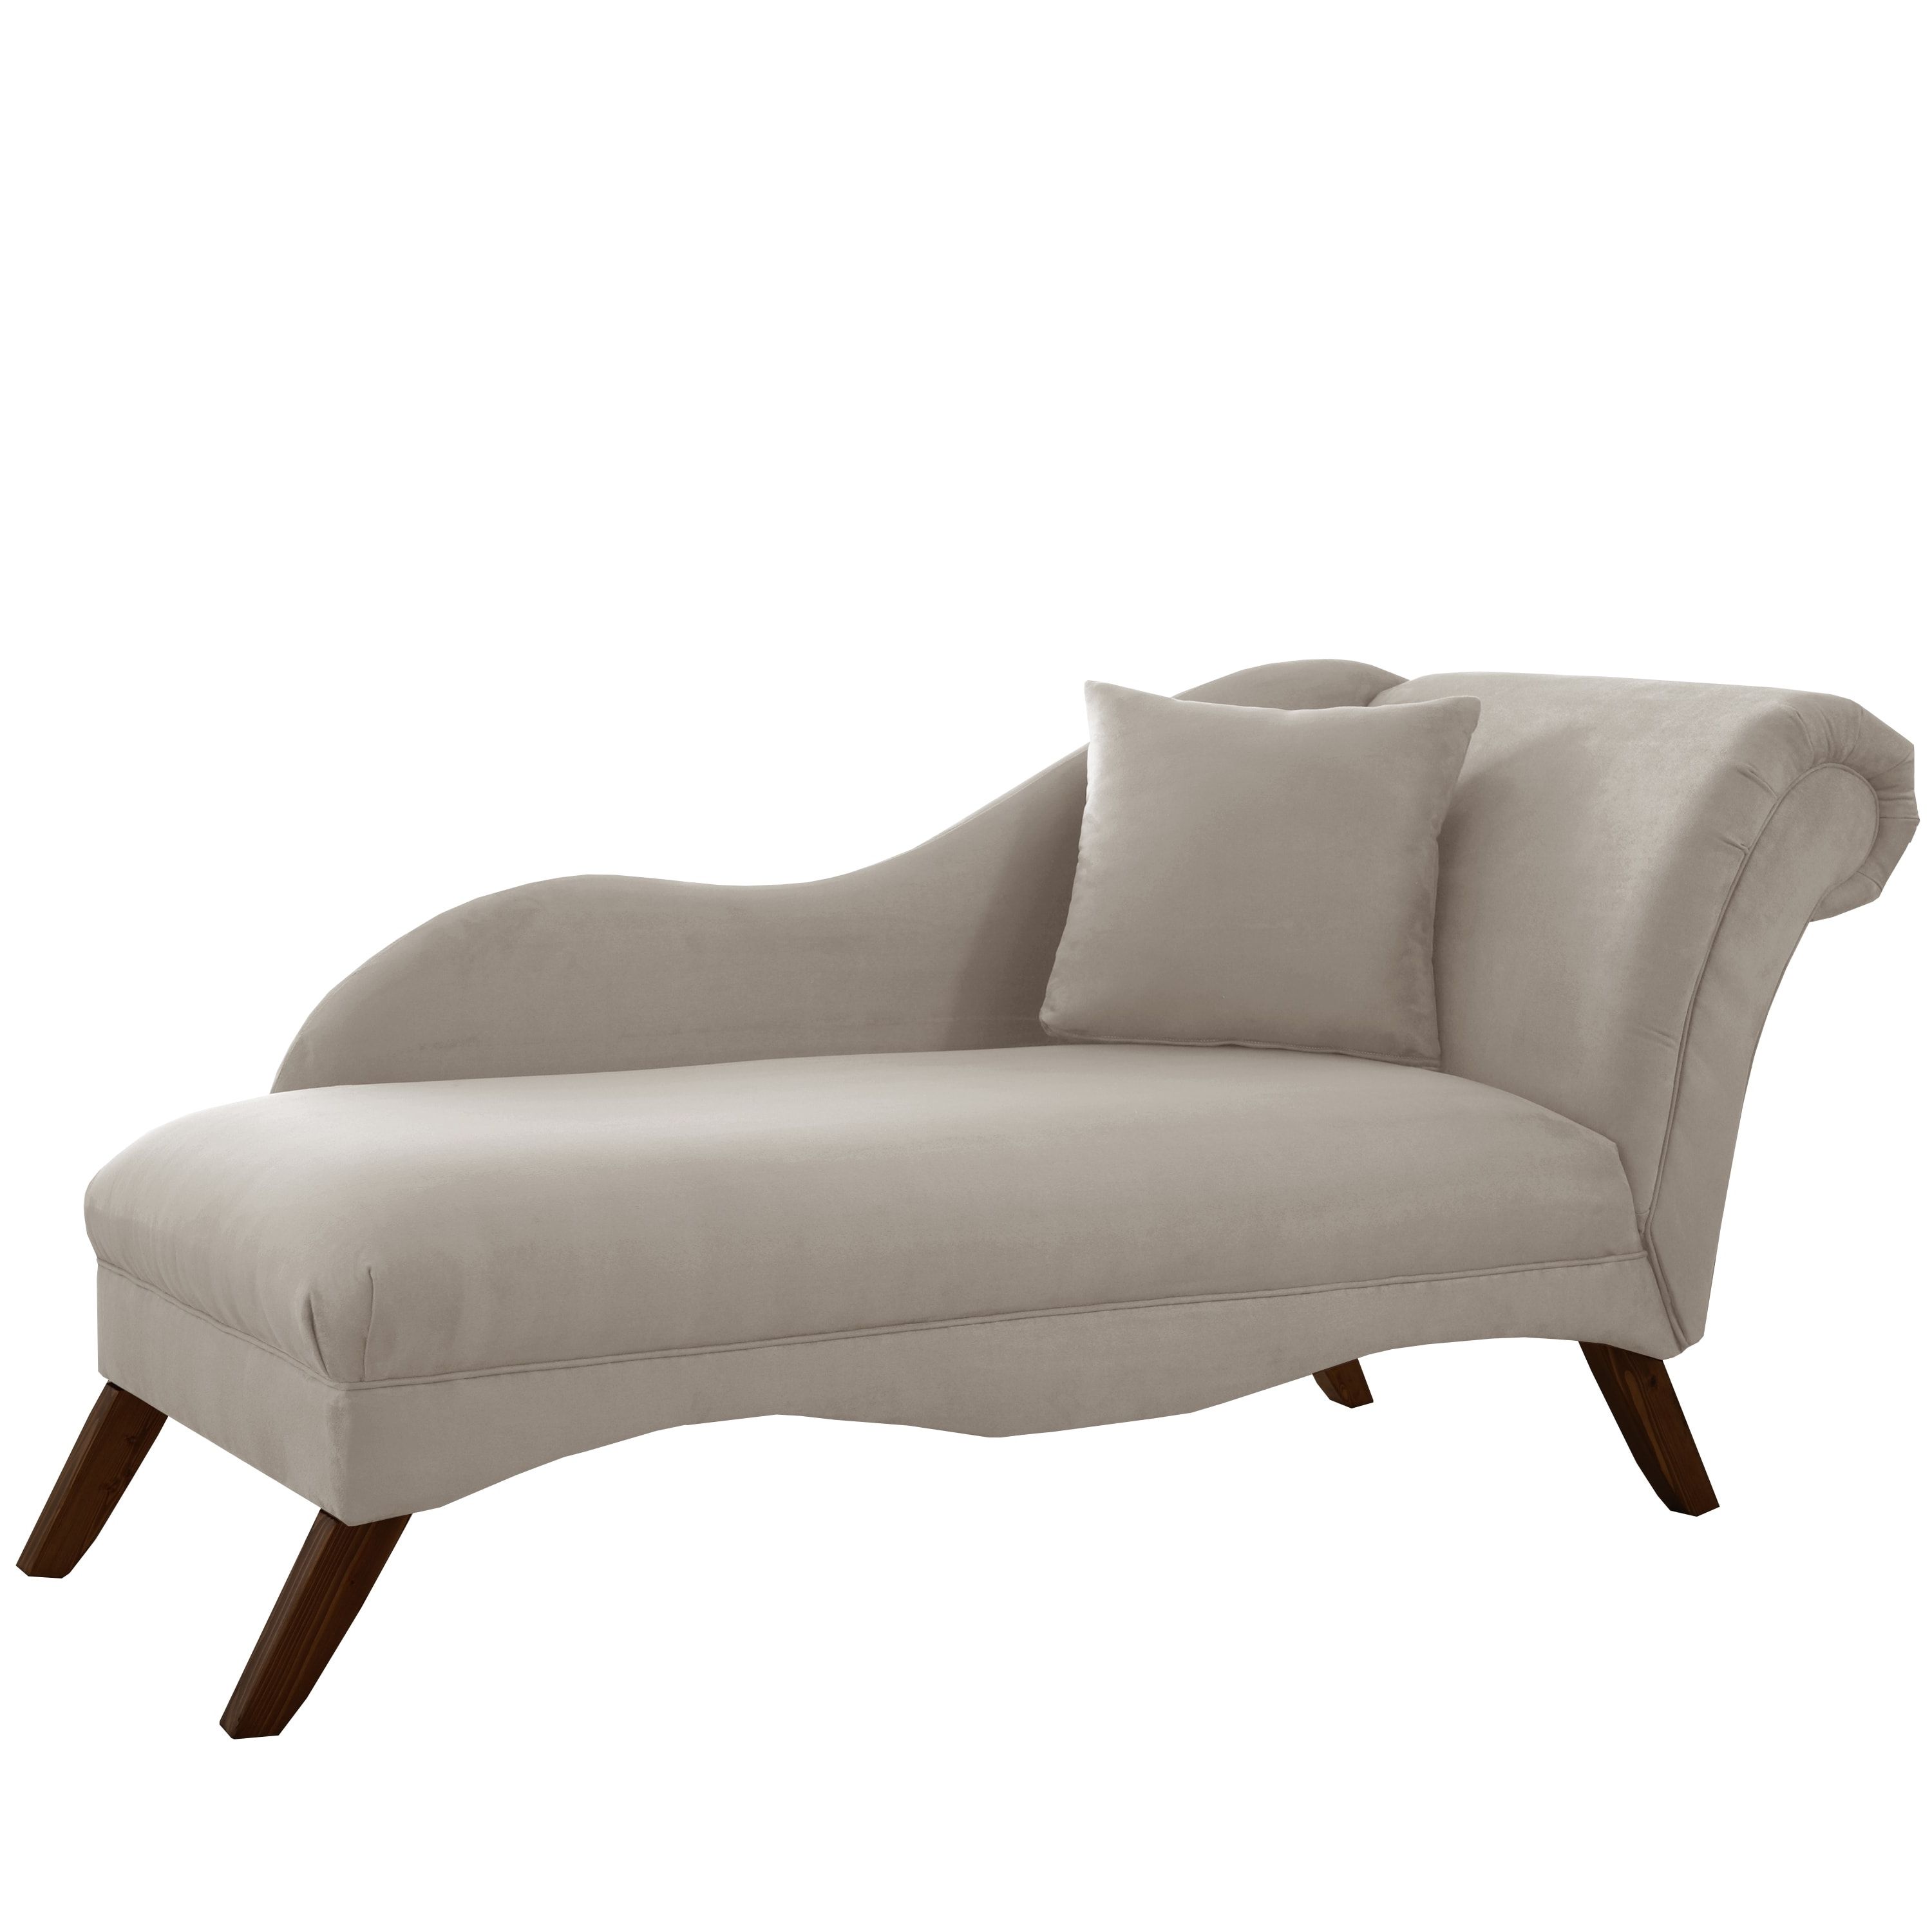 Skyline Furniture Chaise Lounge In Velvet Light Grey – Free For Well Known Skyline Chaise Lounges (View 14 of 15)